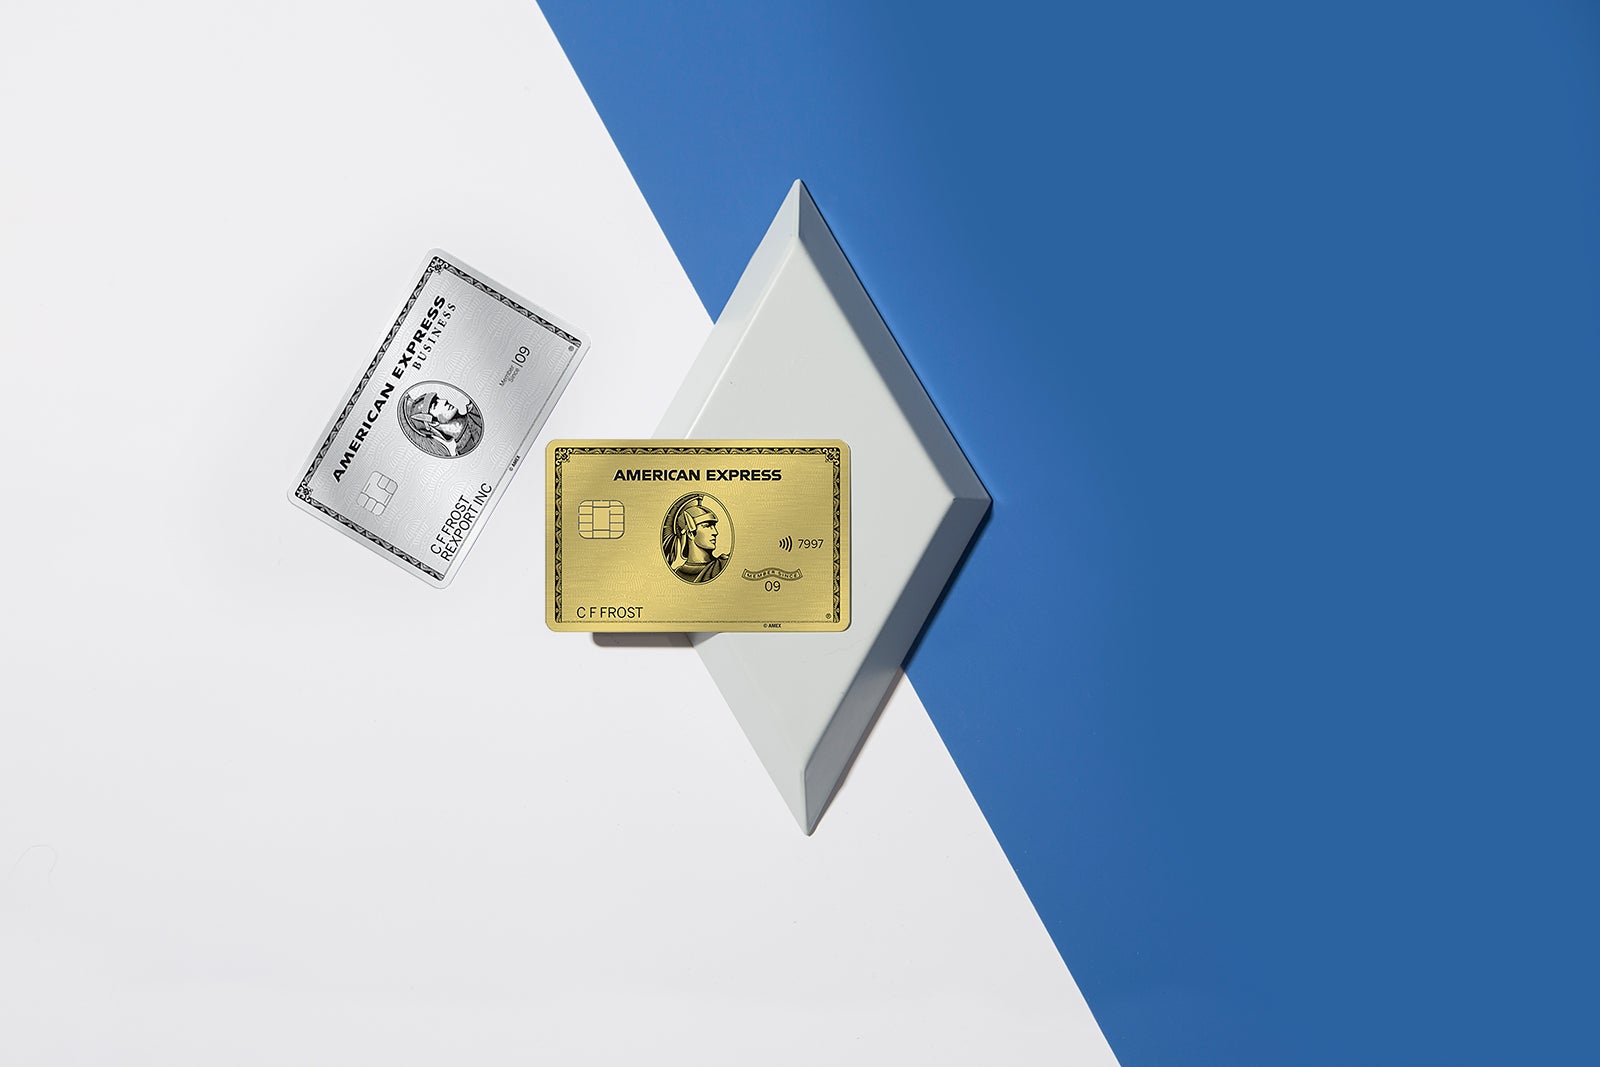 The perfect pair: Amex Gold and Amex Business Platinum